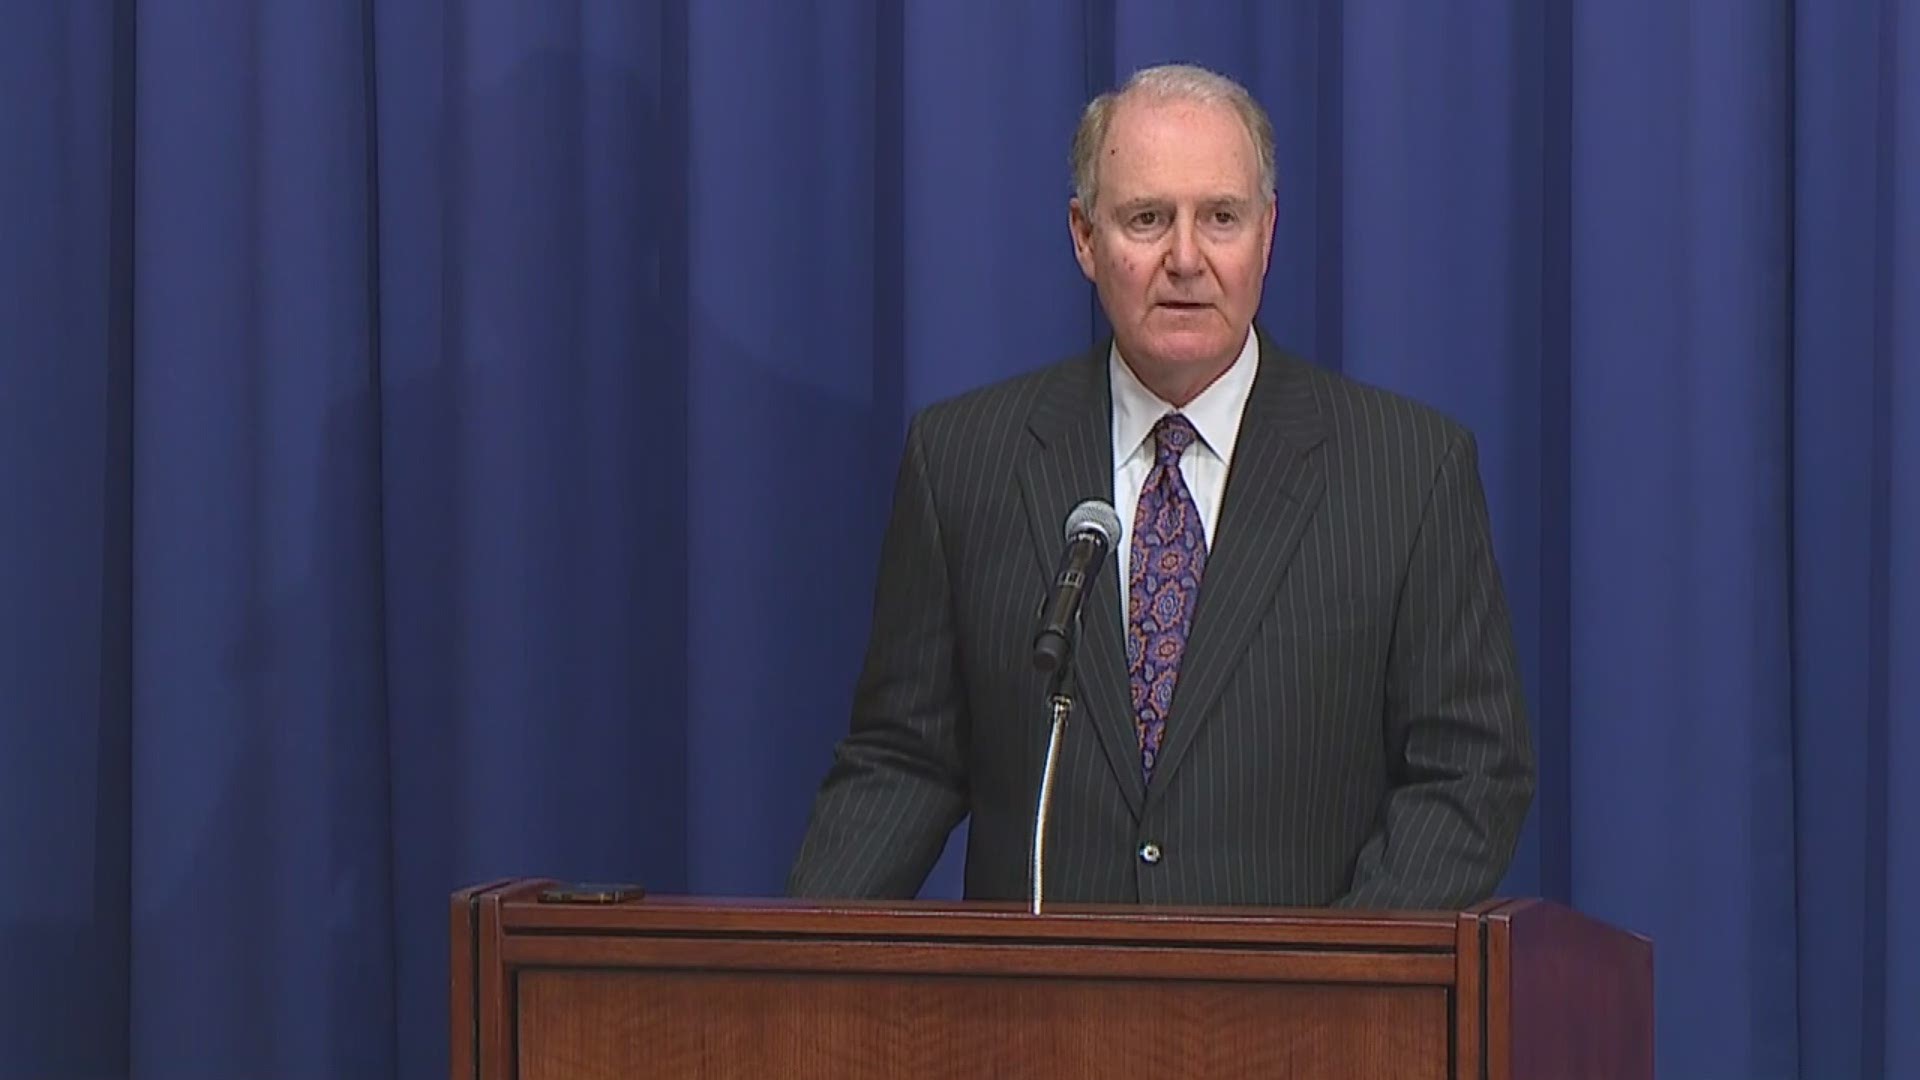 Southwest Airlines CEO Gary Kelly speaks on the airline's loss of a passenger Tuesday. WFAA.com